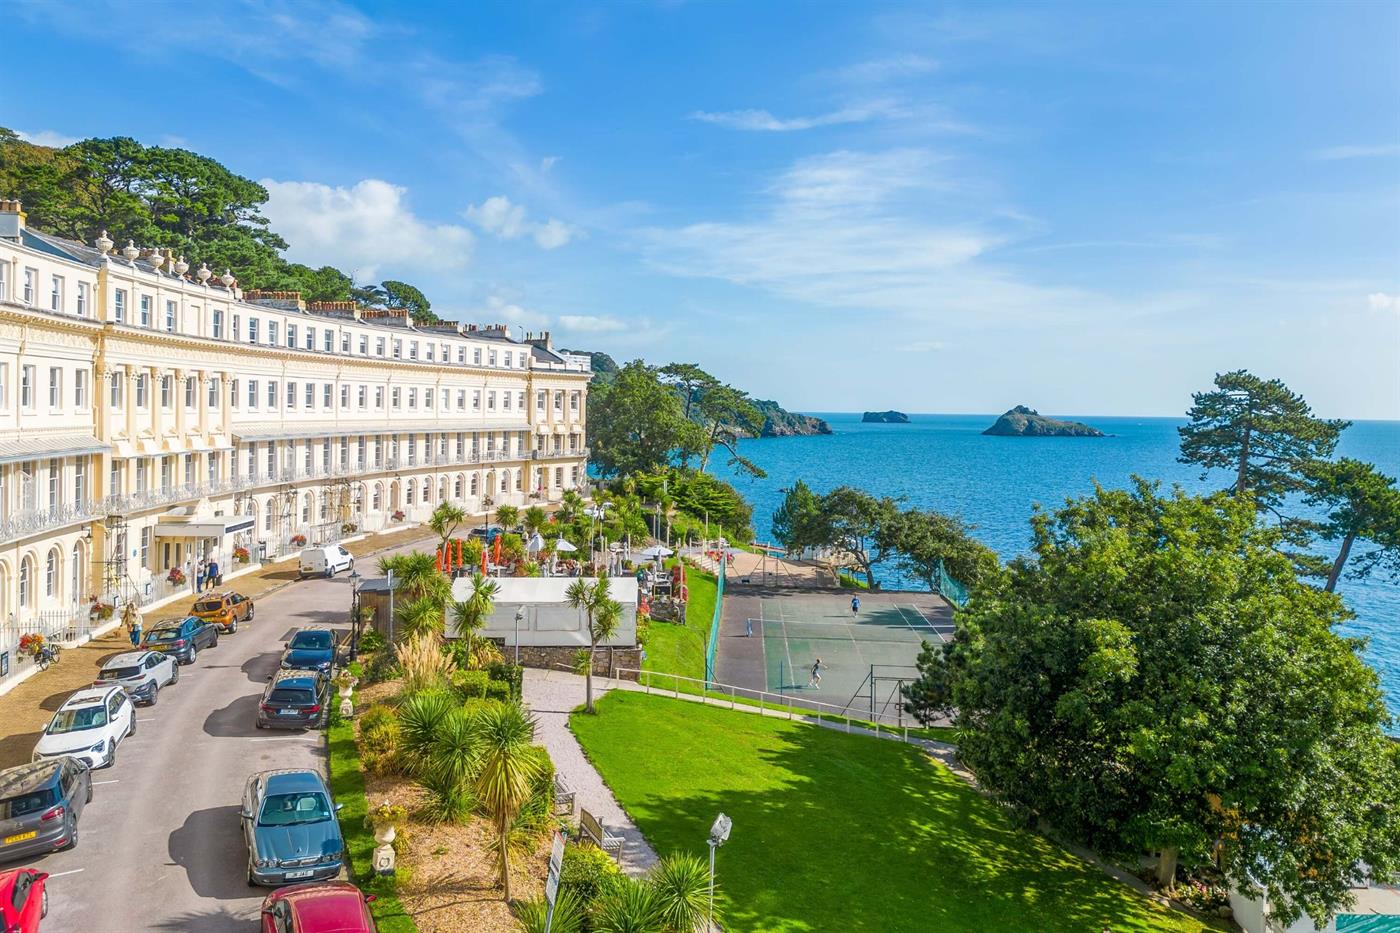 3 Bedroom Apartment to Rent (Let): Hesketh Crescent, Meadfoot, Torquay, TQ1 2LJ